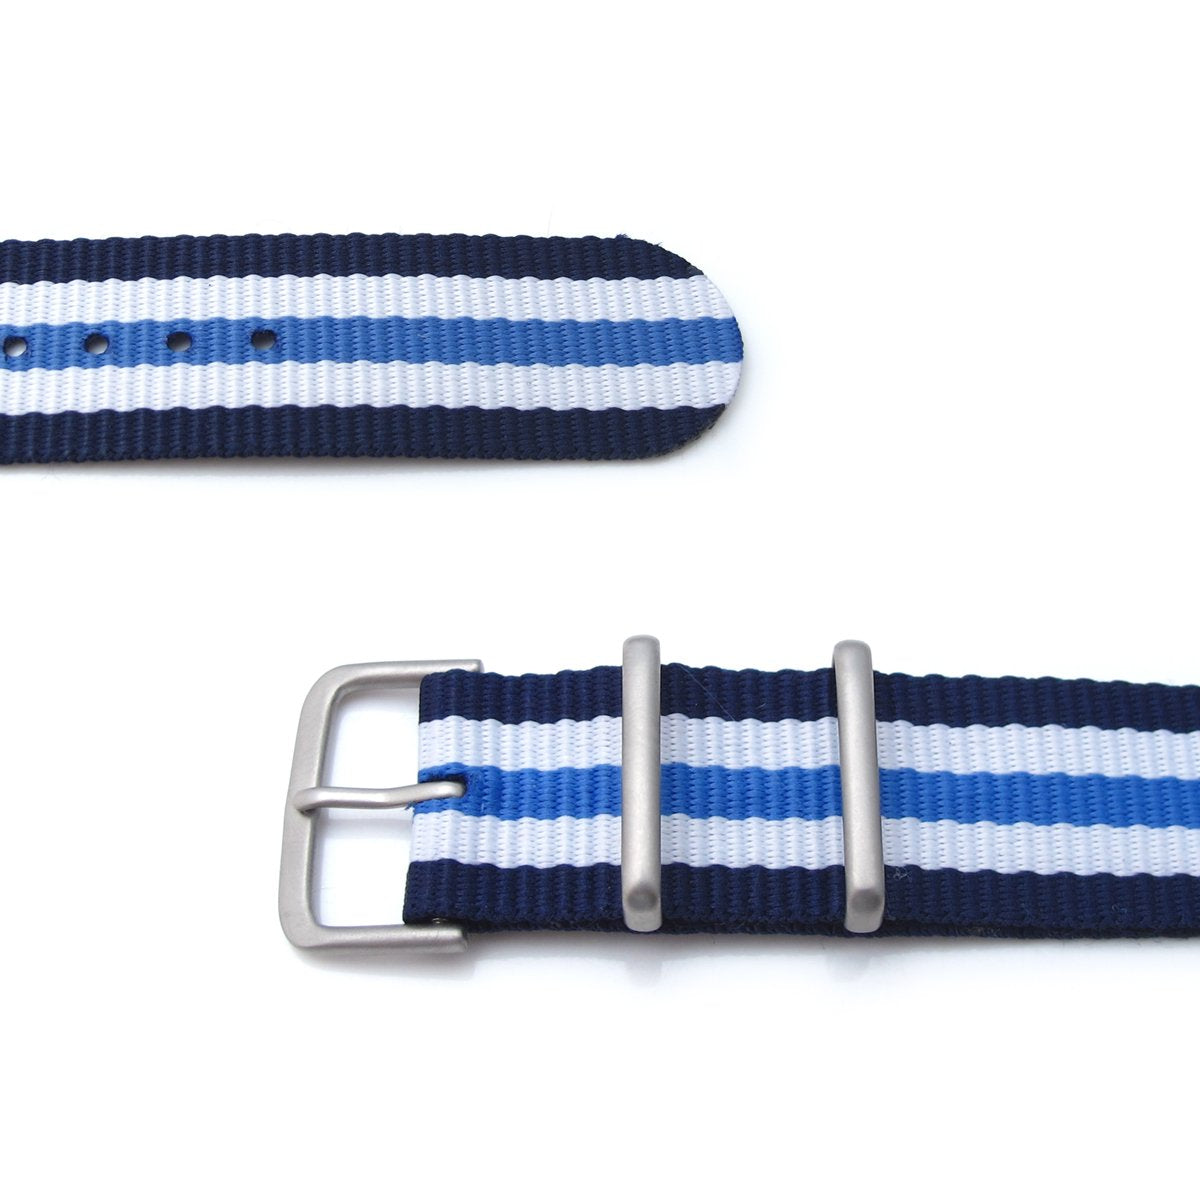 MiLTAT 20mm G10 military watch strap ballistic nylon armband Brushed Blue & White Stripes Strapcode Watch Bands